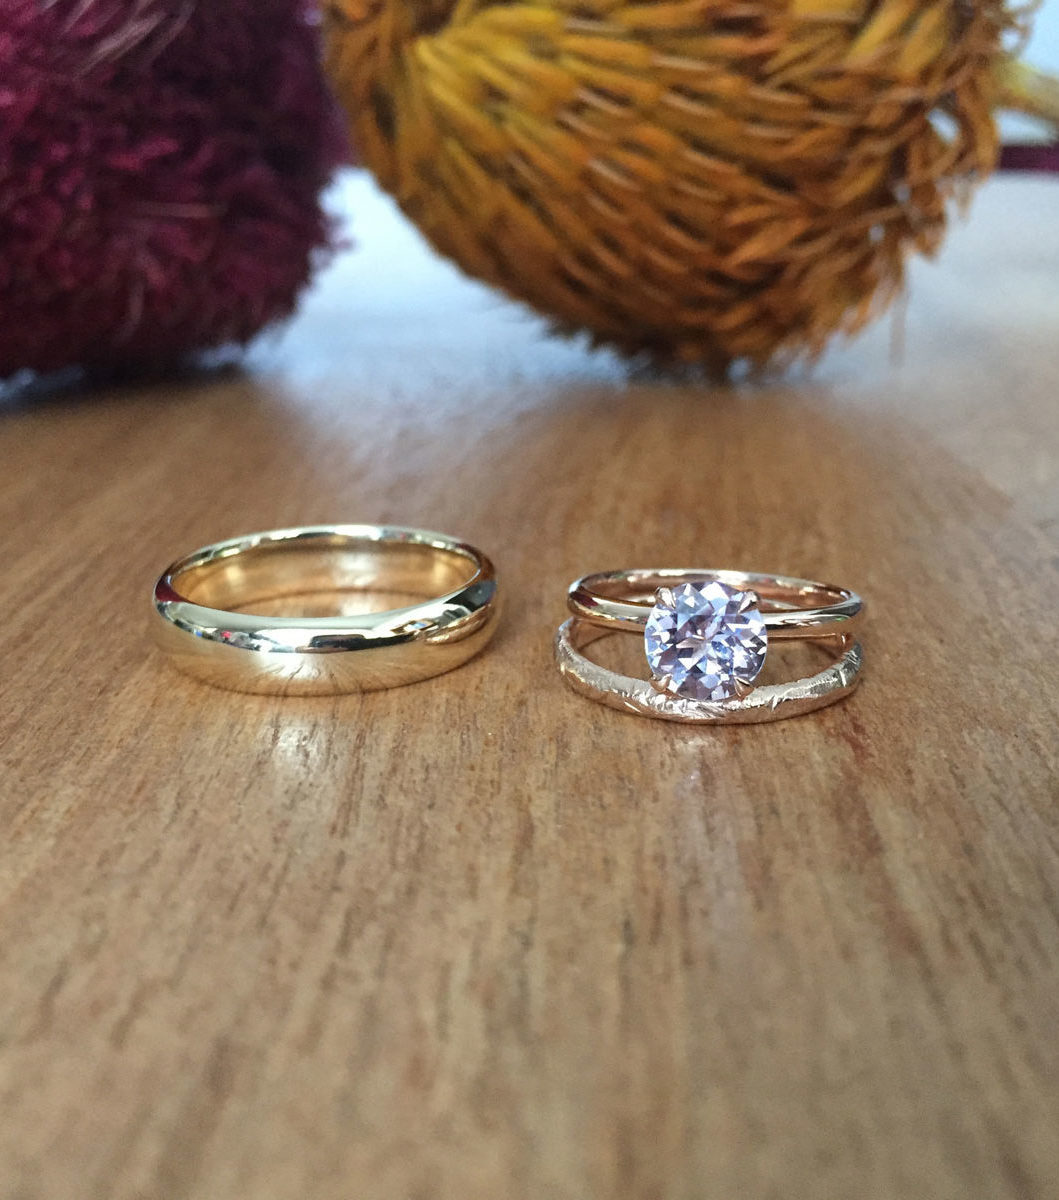 Alternative engagement rings - Pink sapphire and rose gold engagement ring with a yellow gold wedding band